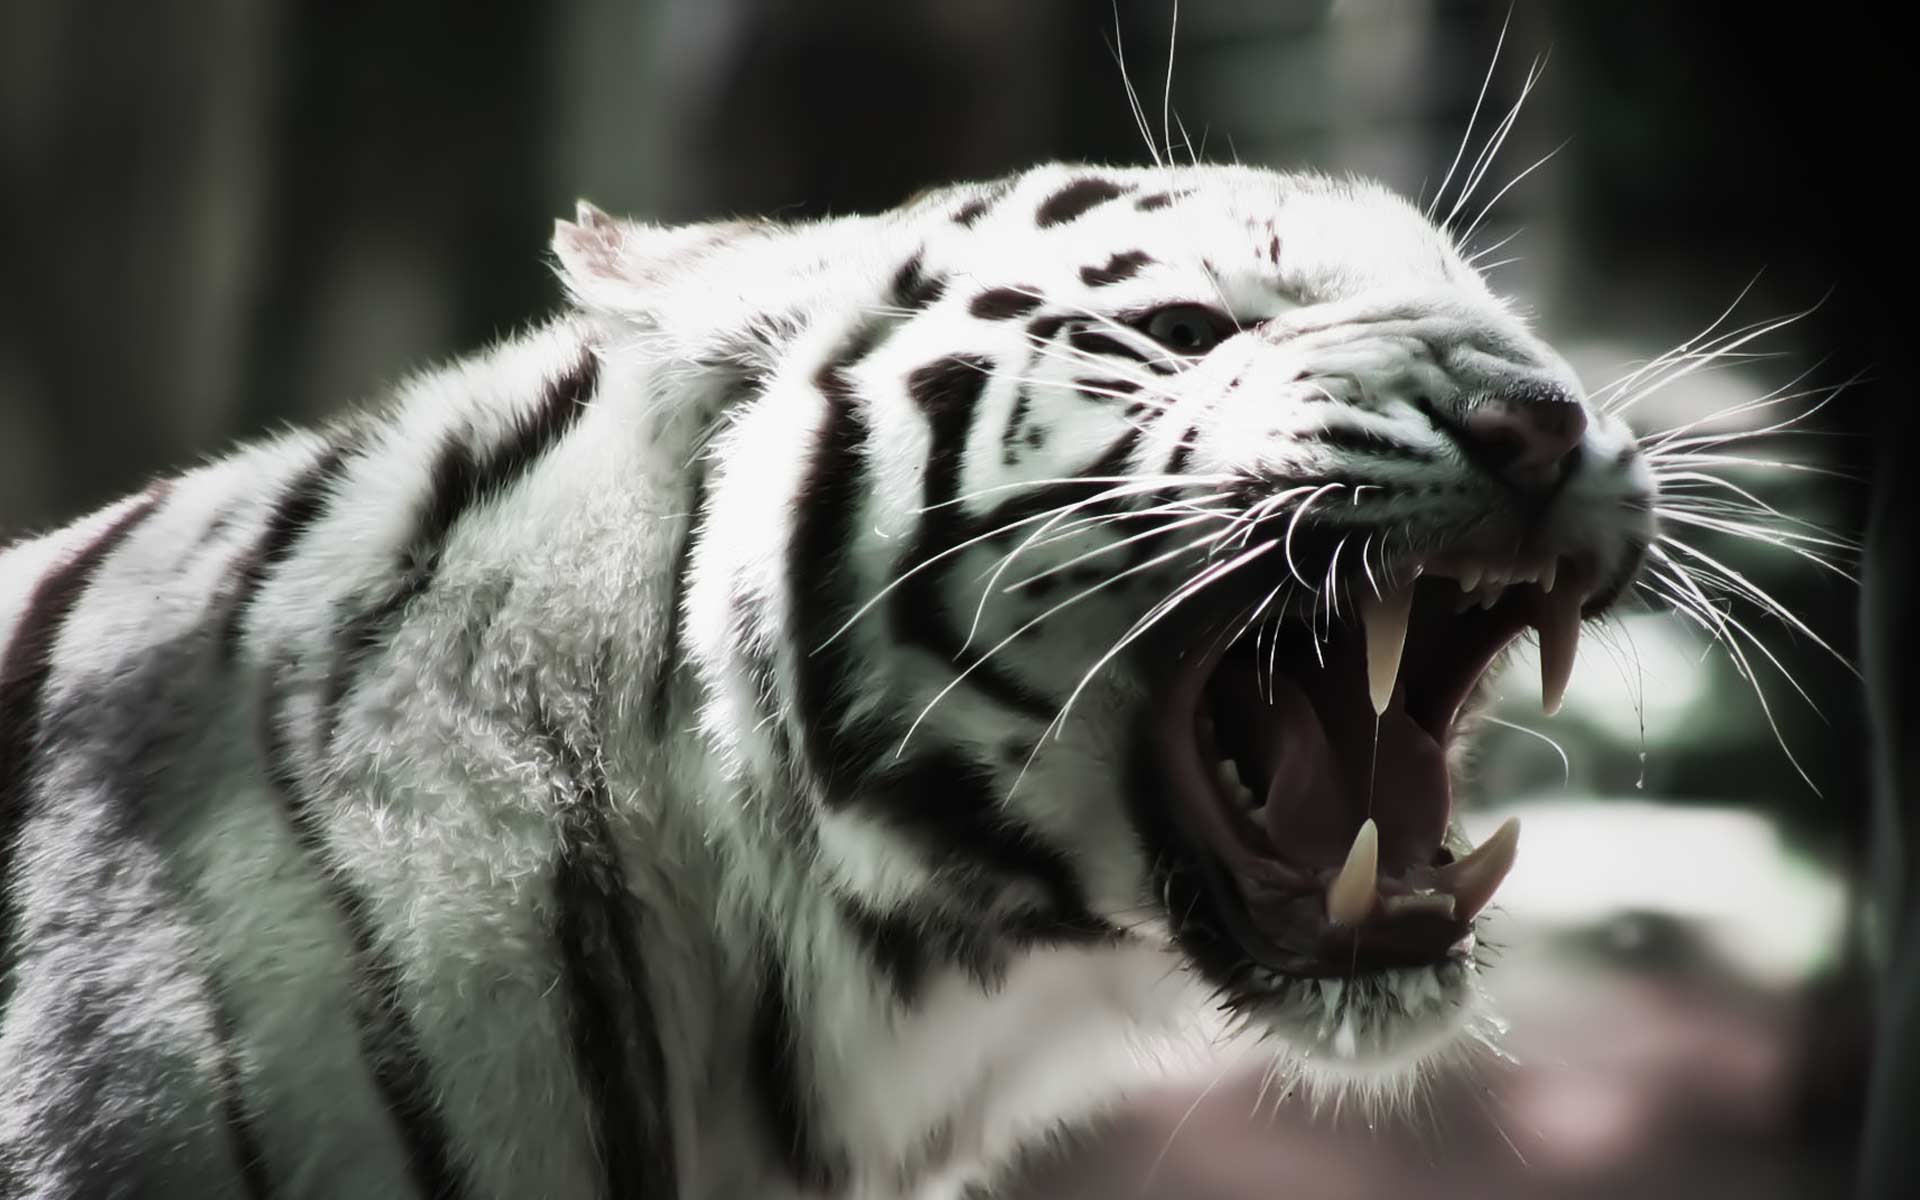  is under the tiger wallpapers category of hd wallpapers white 1920x1200